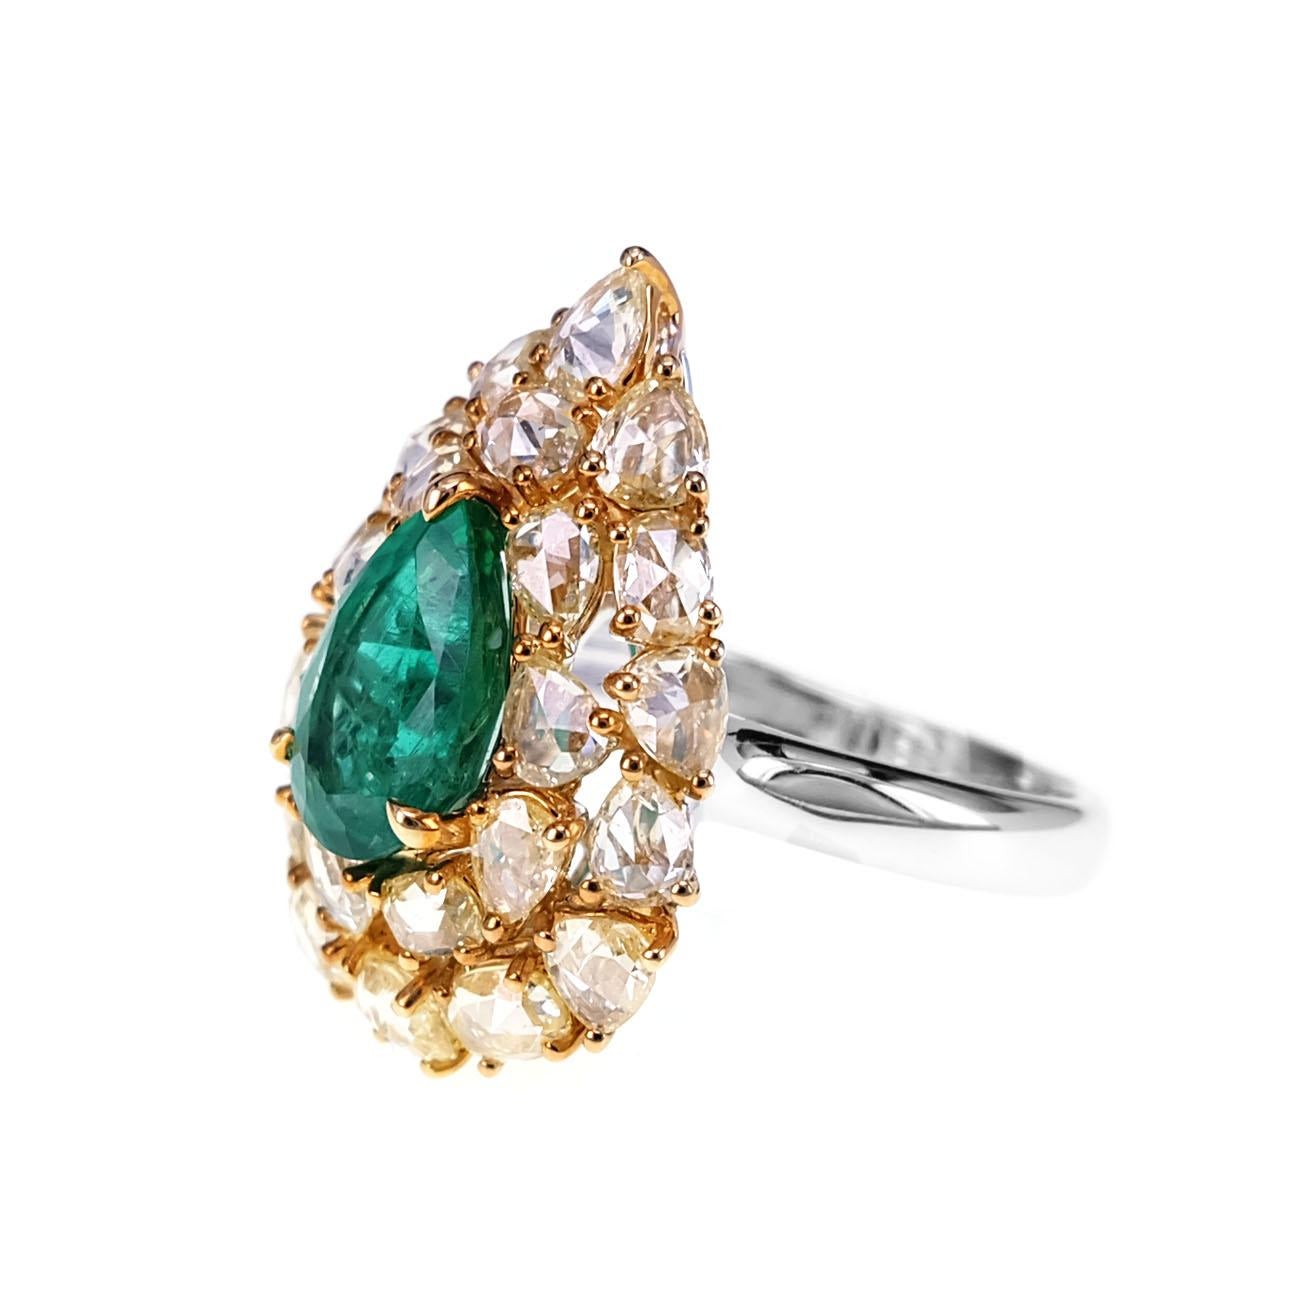 A beautiful combination of 1.96 carats of vivid green emeralds and 2.48 carats of yellow rose cut are set in this cocktail ring. The details of the ring are mentioned below:
Color: Fancy Light Yellow
Clarity: Vs
Ring Size: US 6.5
Ring size can be